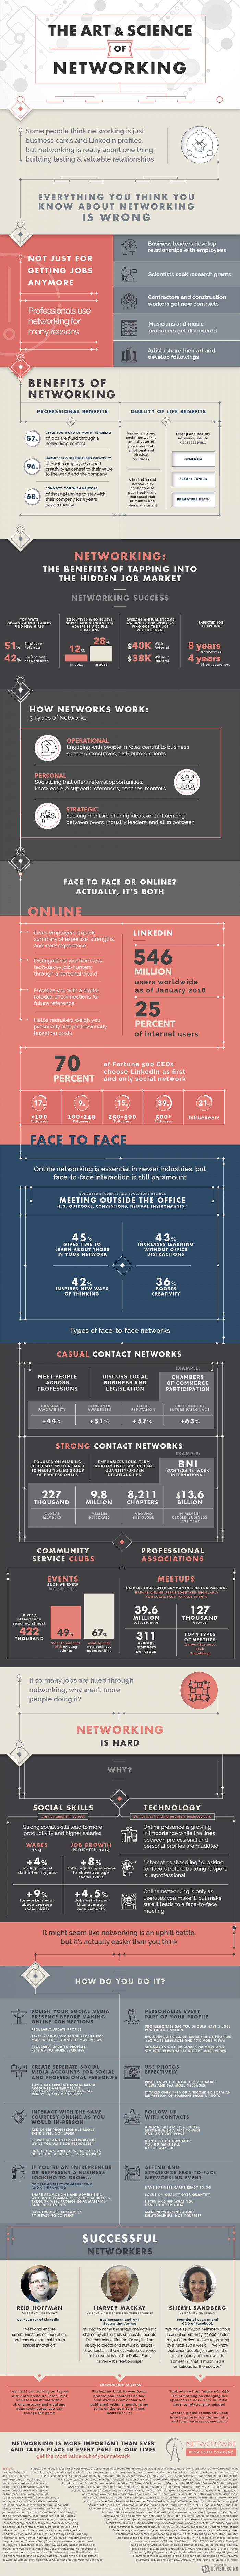 Infographic on how to build a strong network